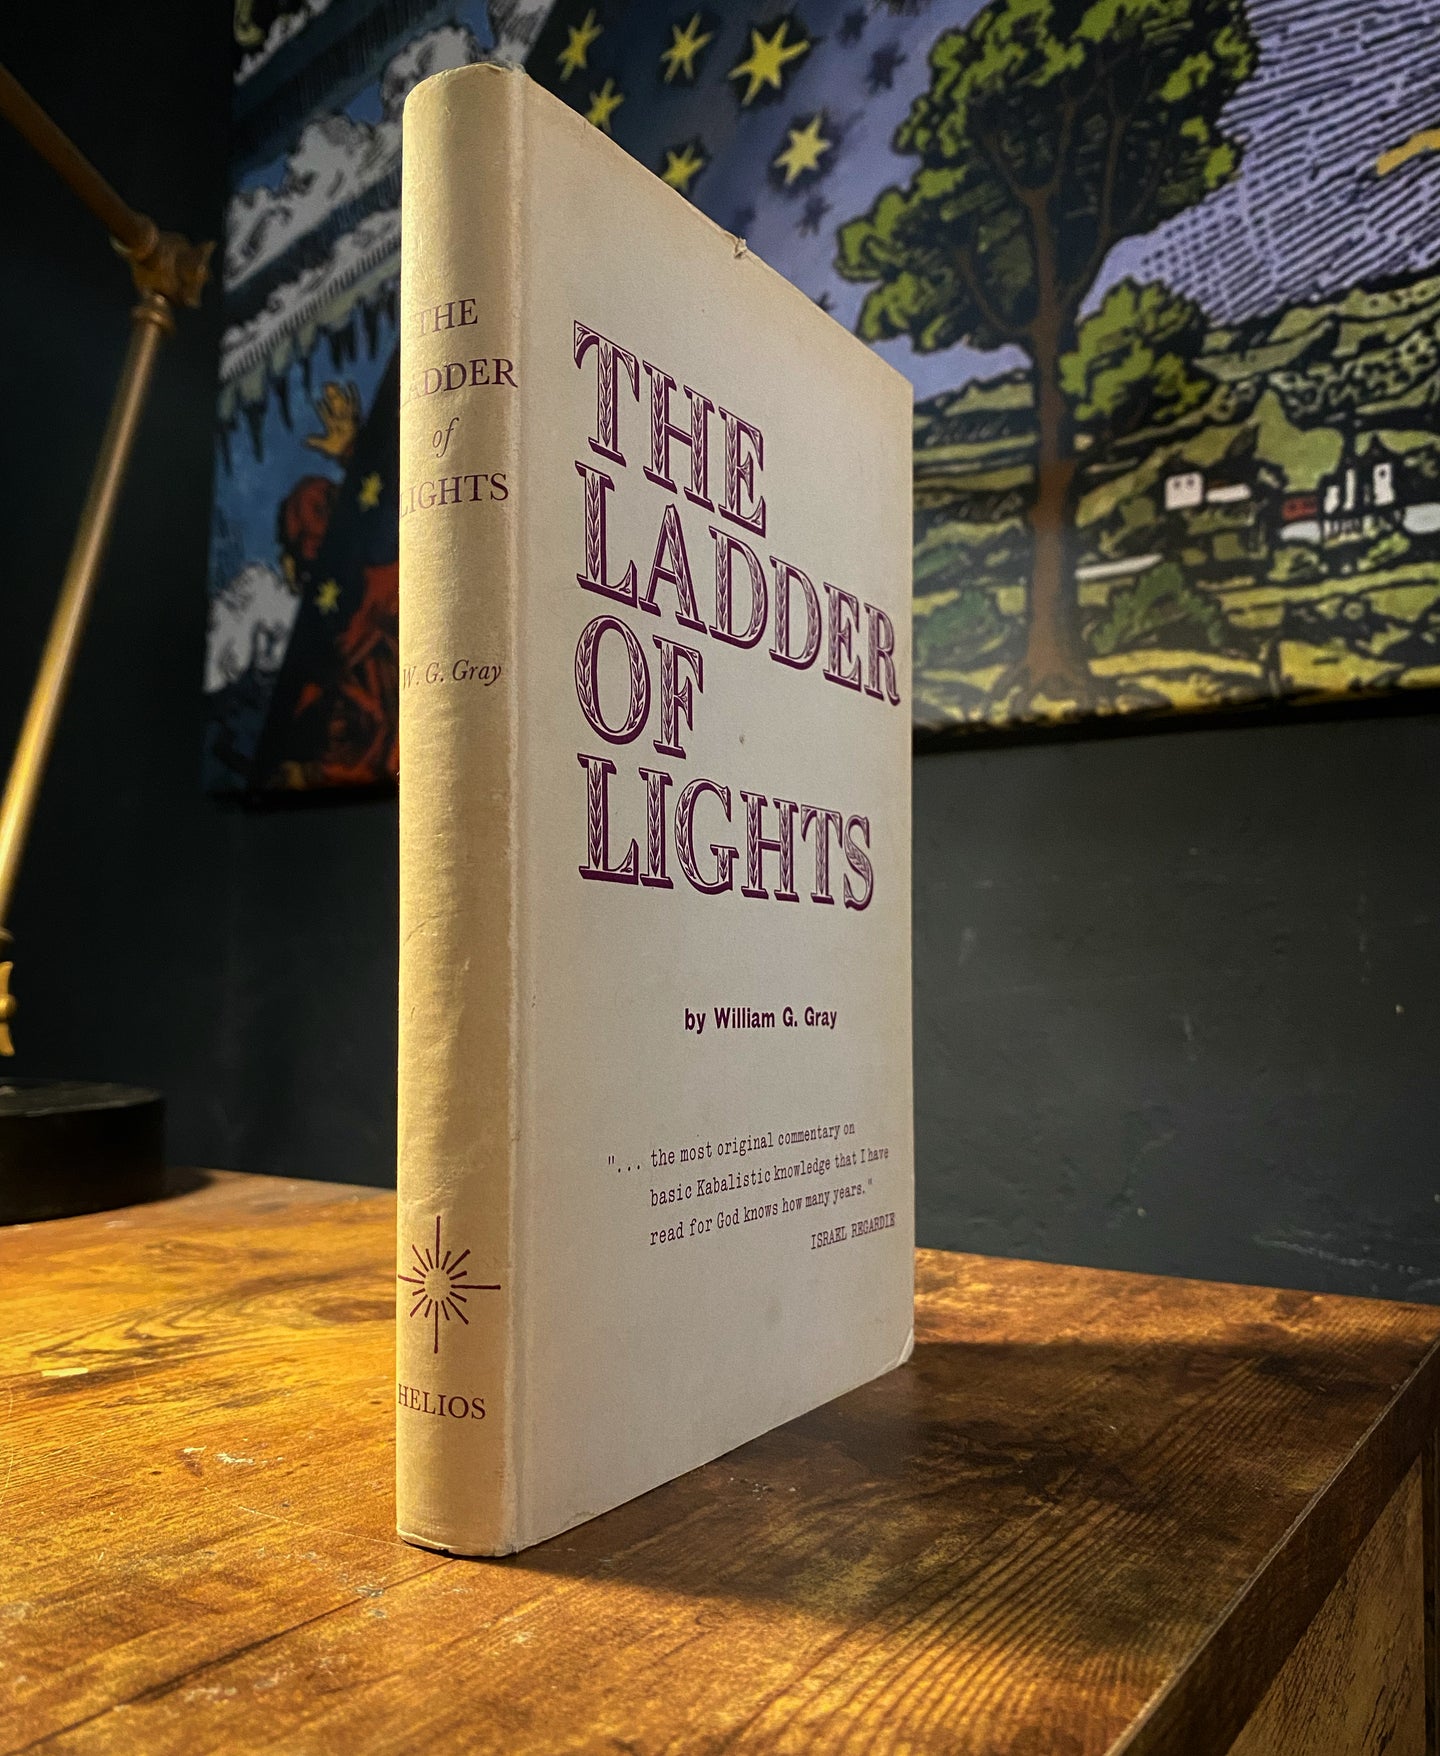 The Ladder of Lights by William Gray